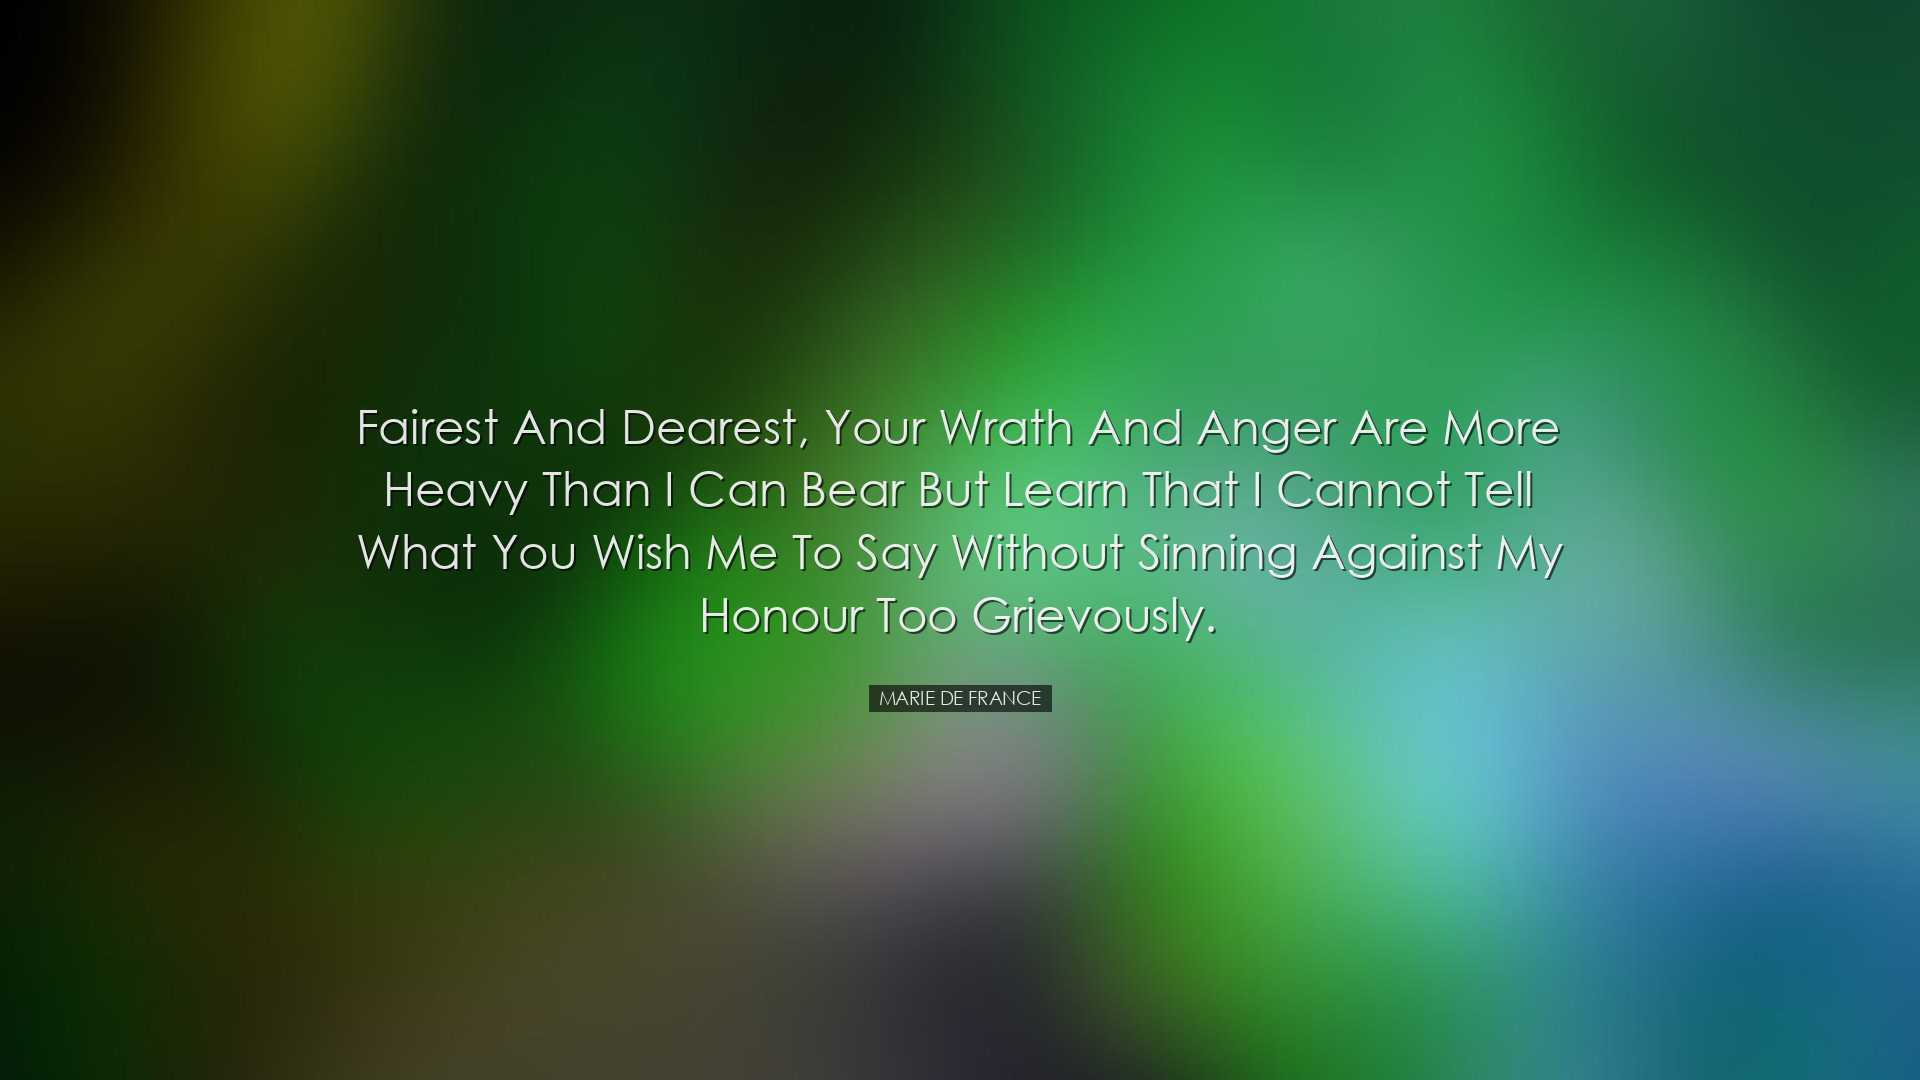 Fairest and dearest, your wrath and anger are more heavy than I ca